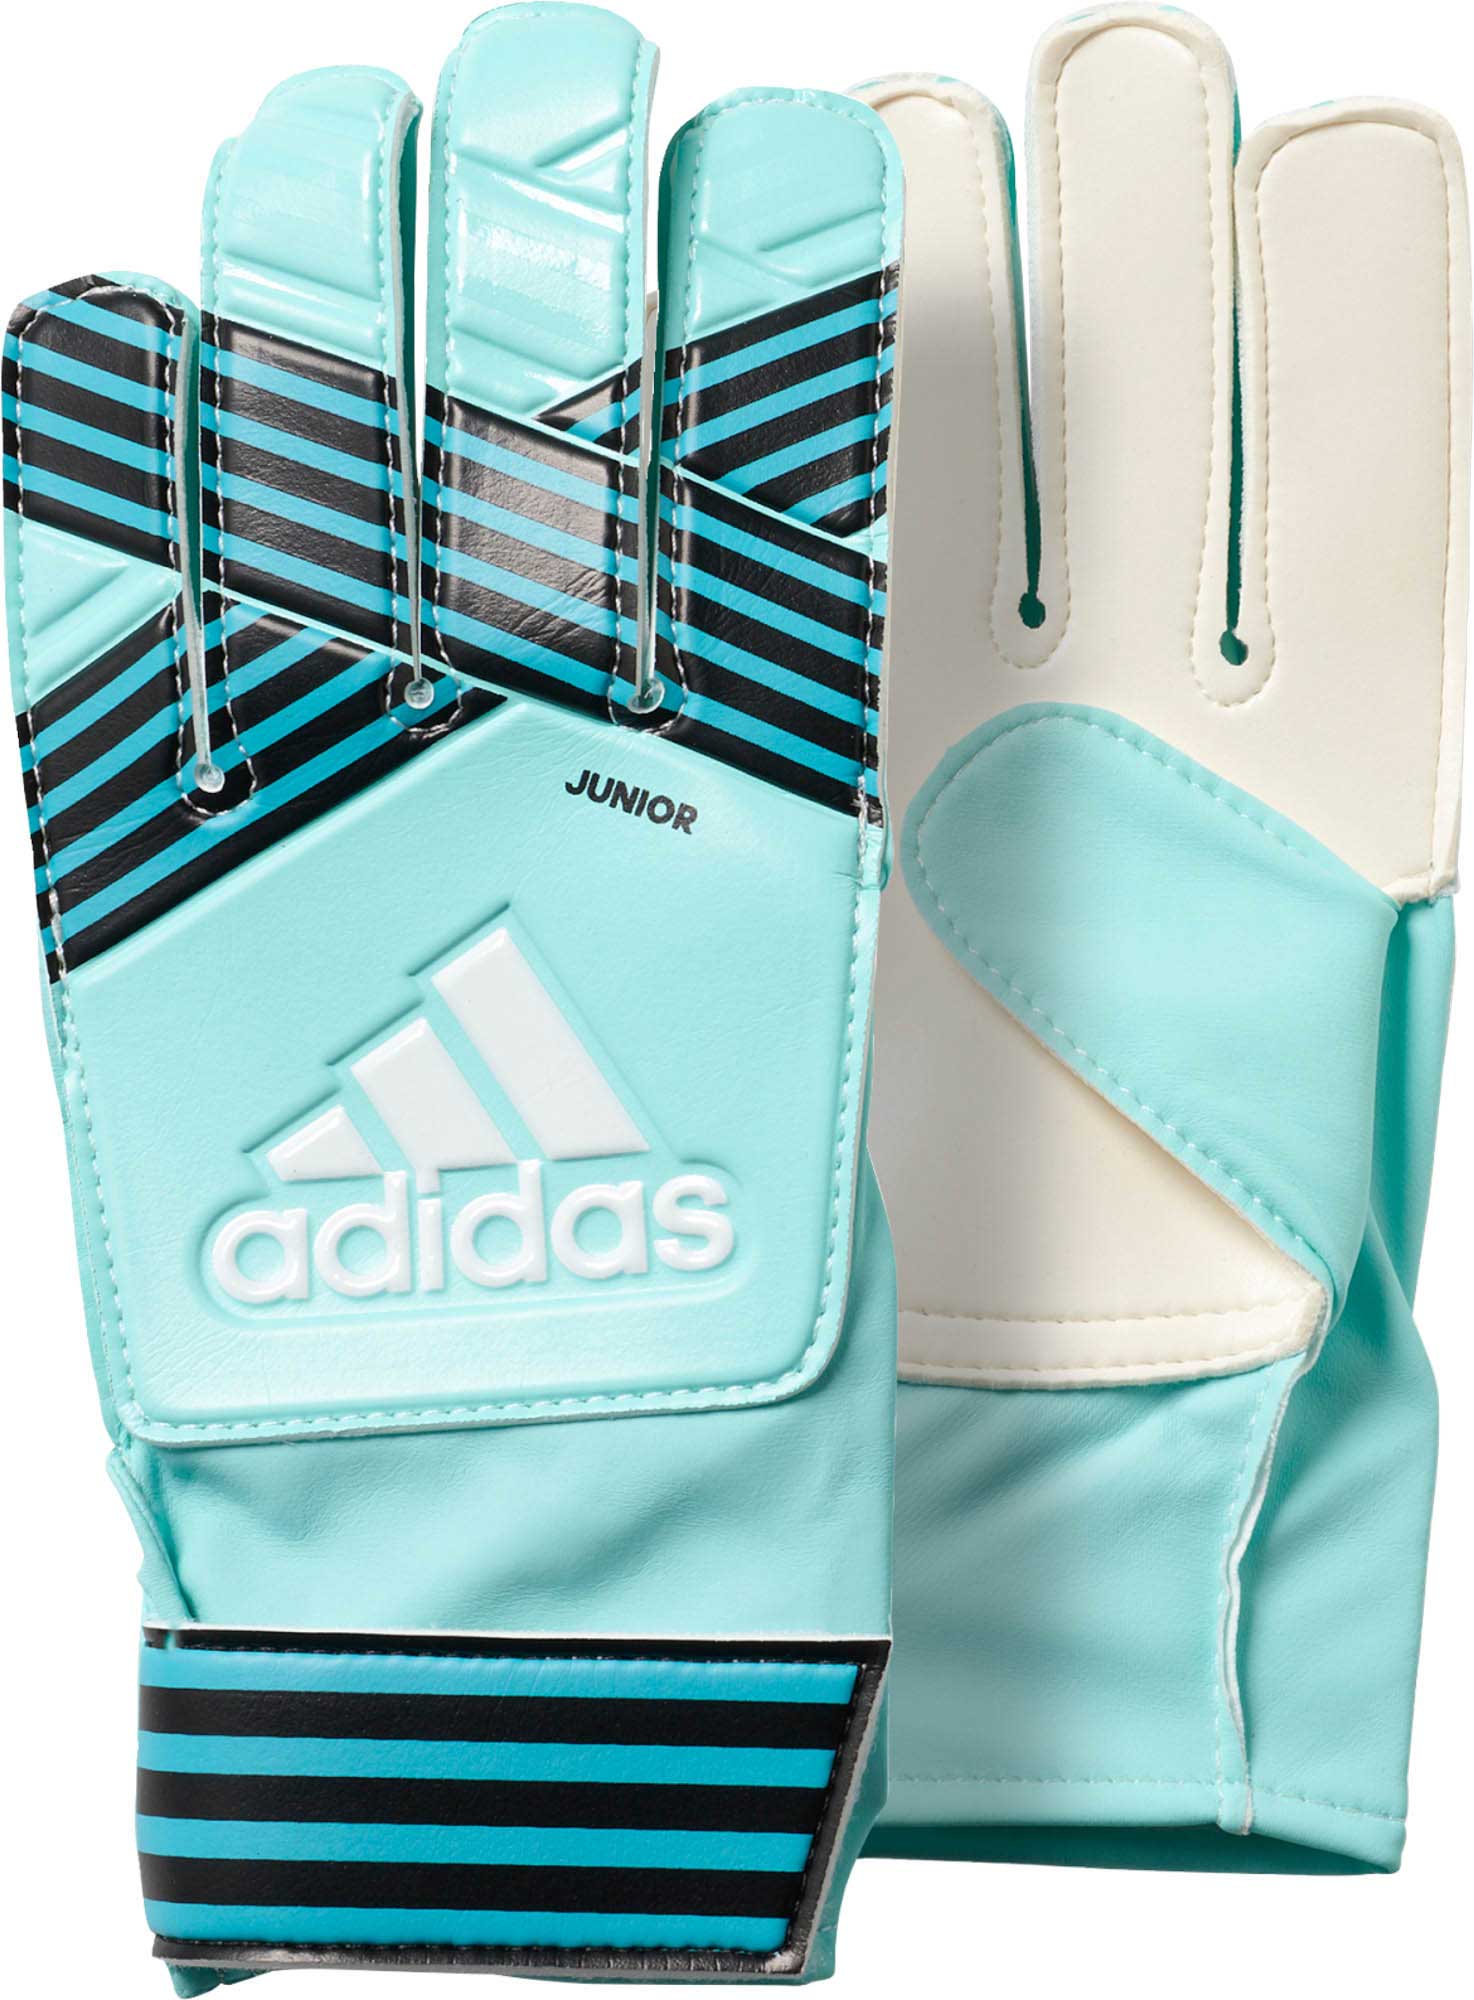 adidas youth soccer gloves